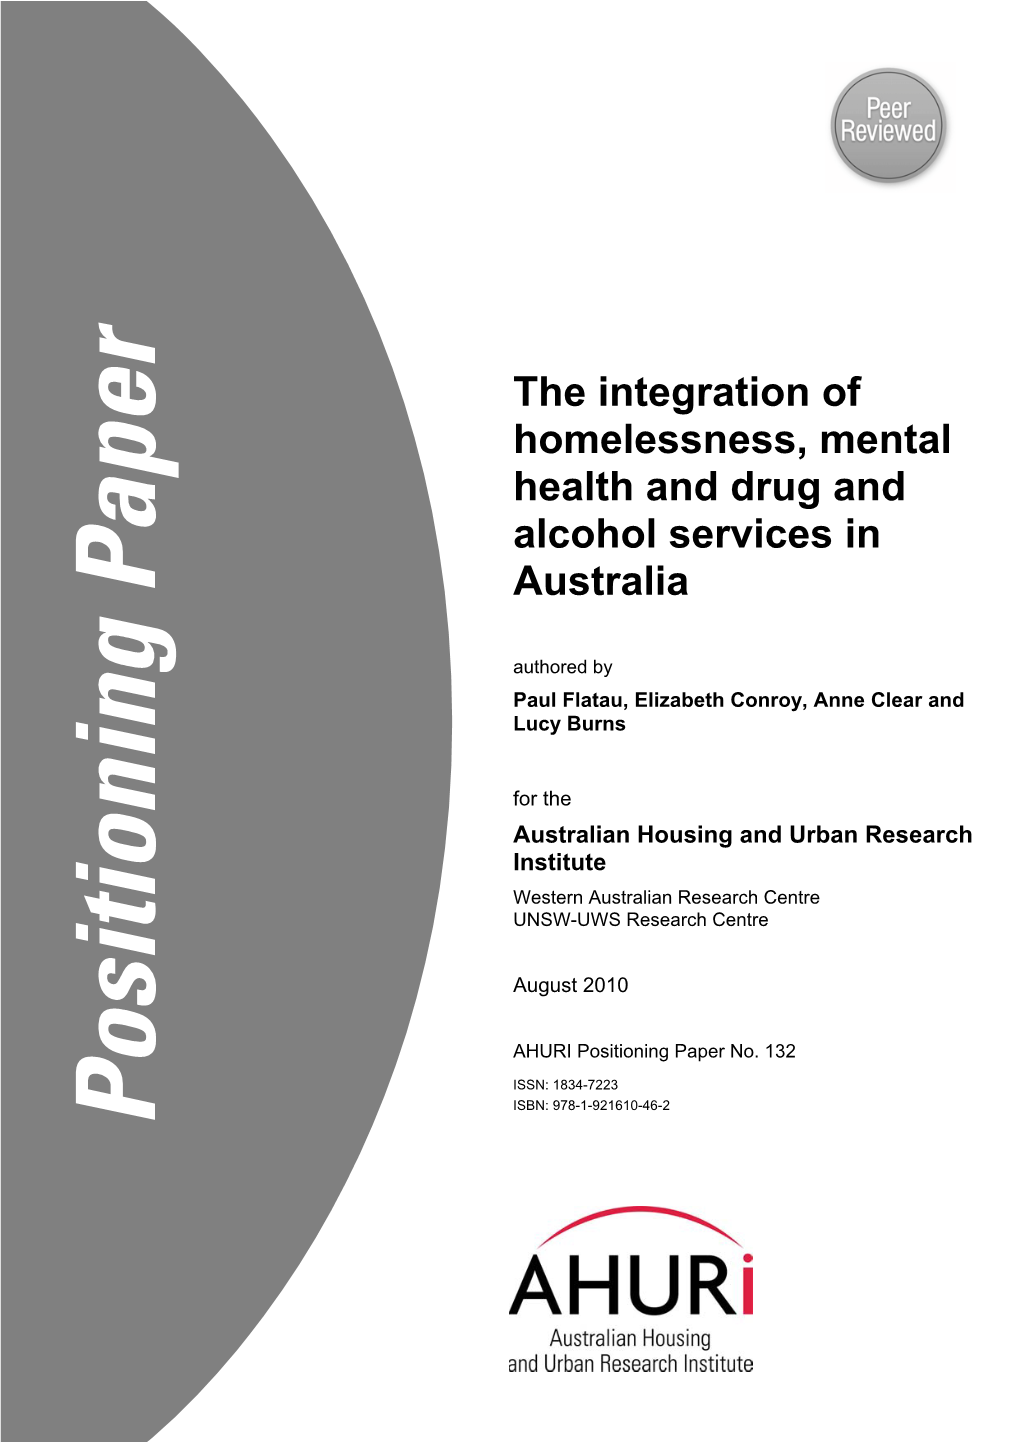 The Integration of Homelessness, Mental Health and Drug and Alcohol